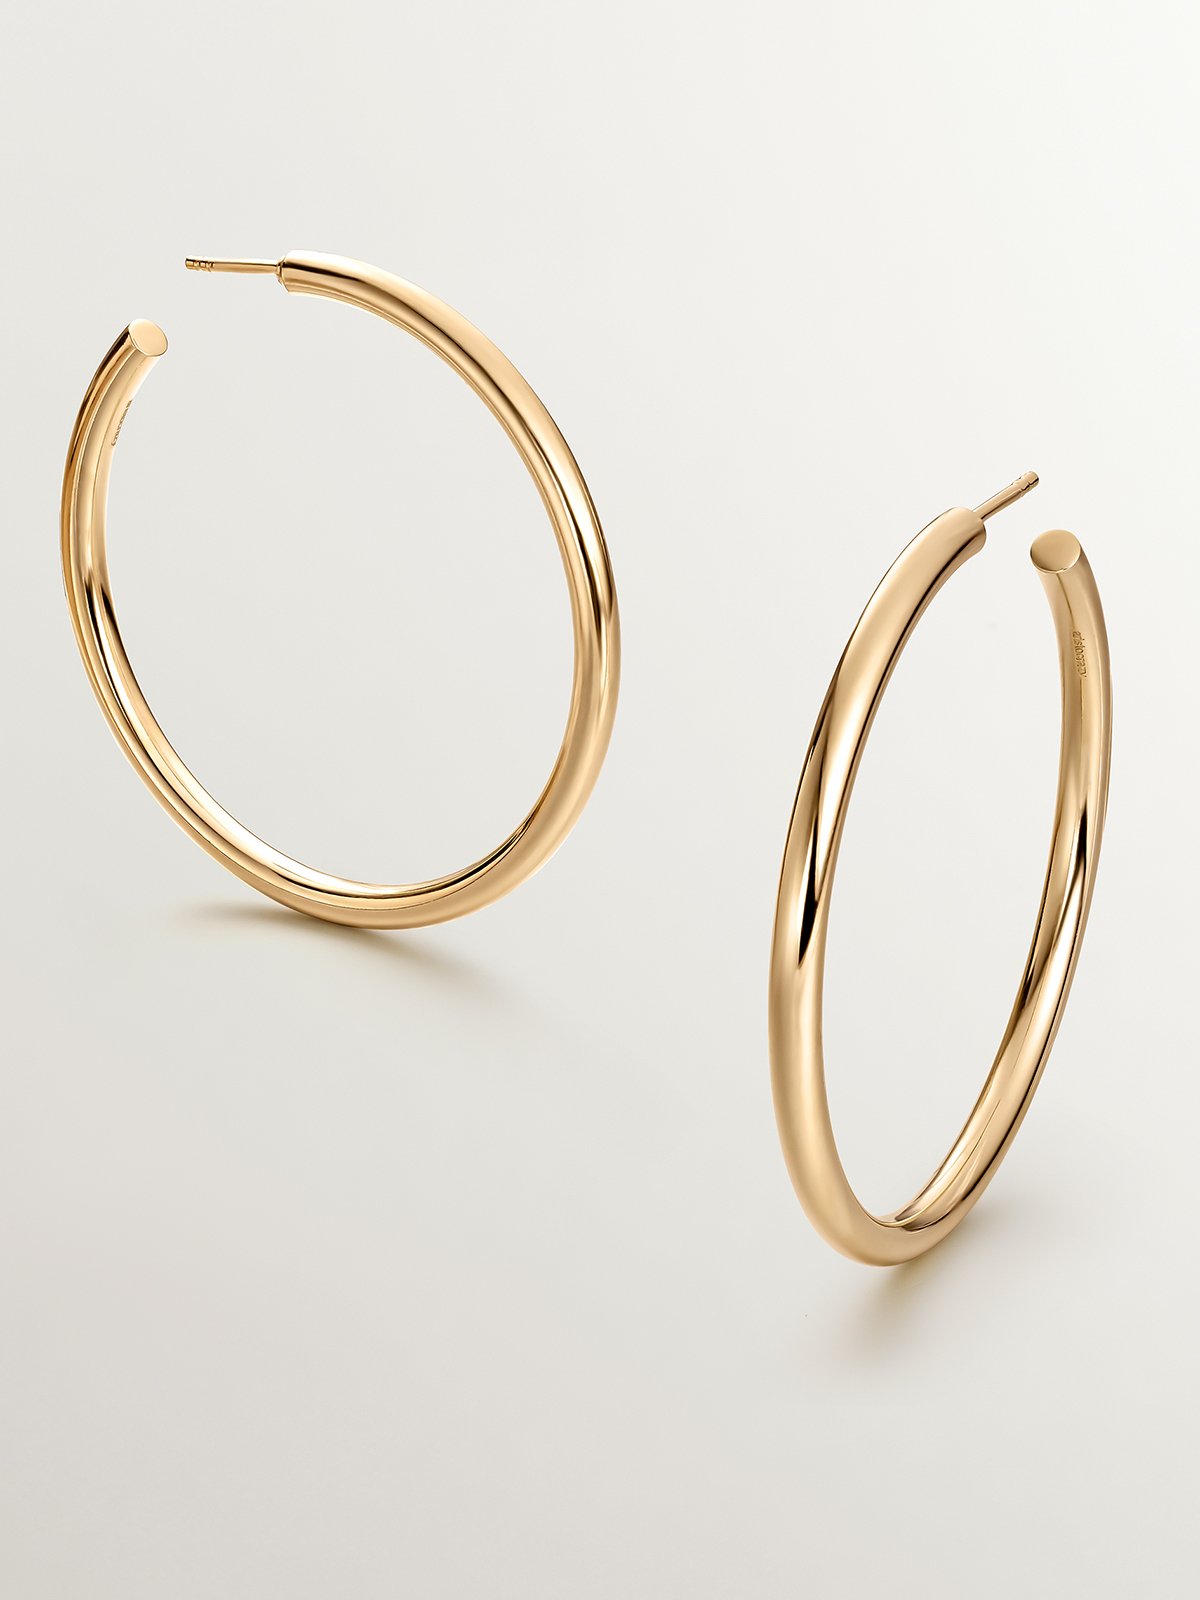 Large hoop earrings made of 925 silver, coated in 18K yellow gold.